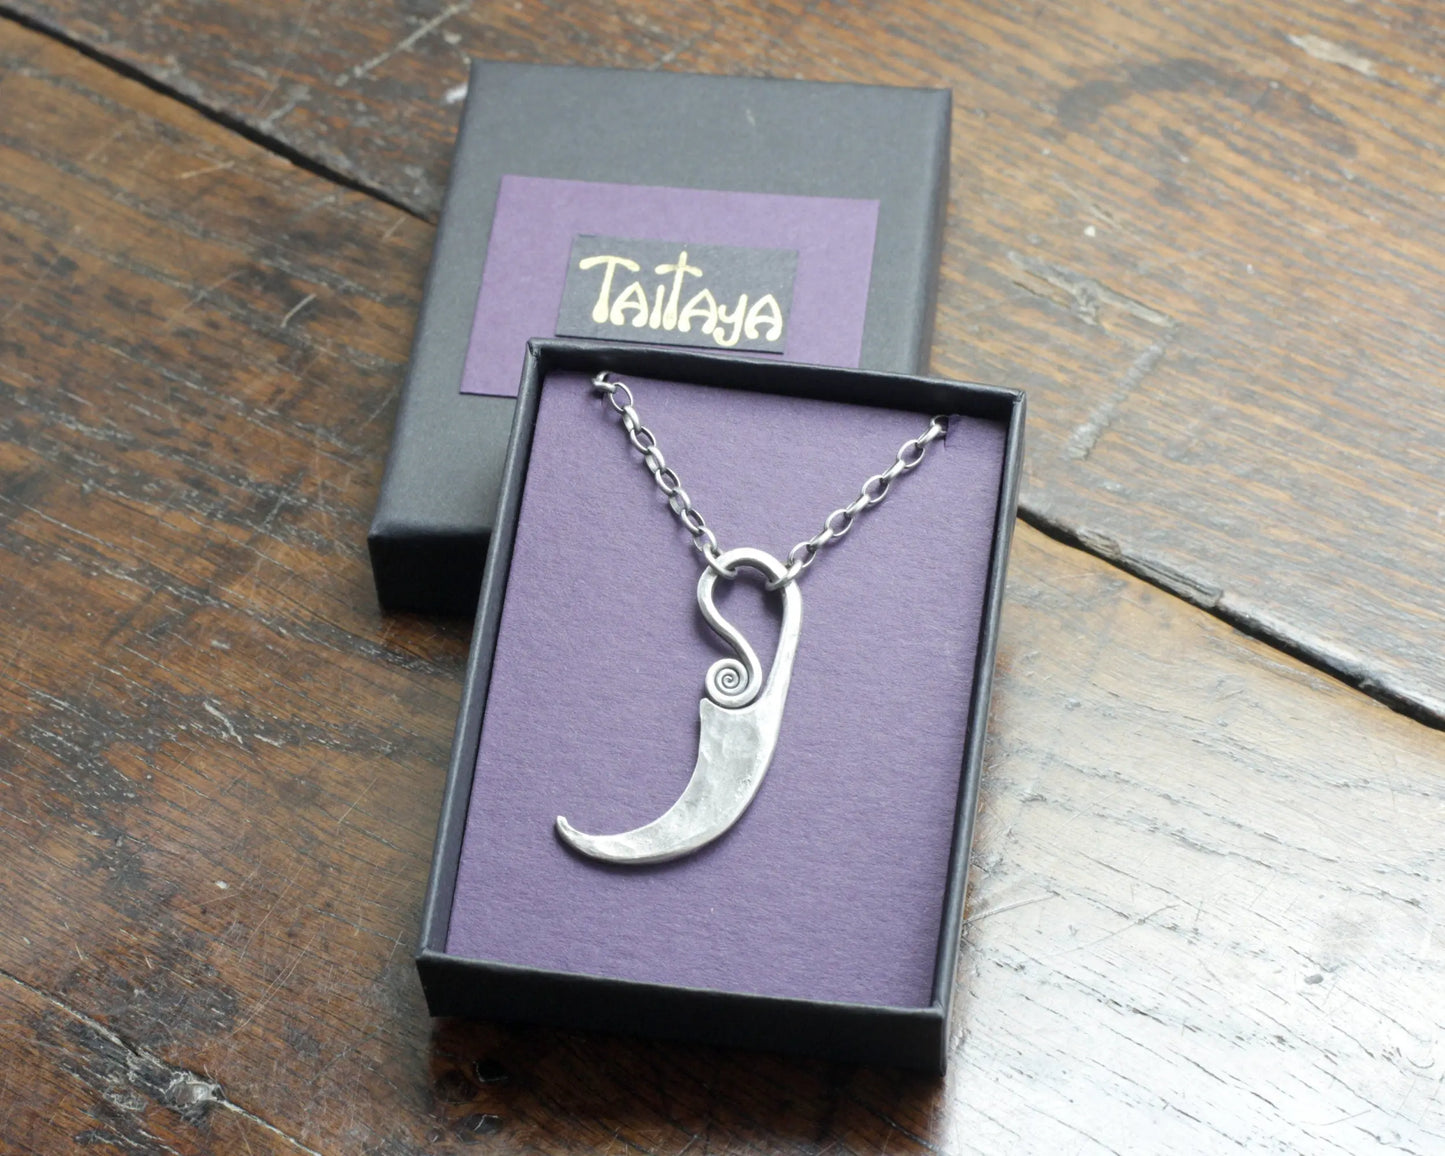 Forged Silver Sickle Pendant, solid Sterling Silver, 925 pendant on a thick silver chain